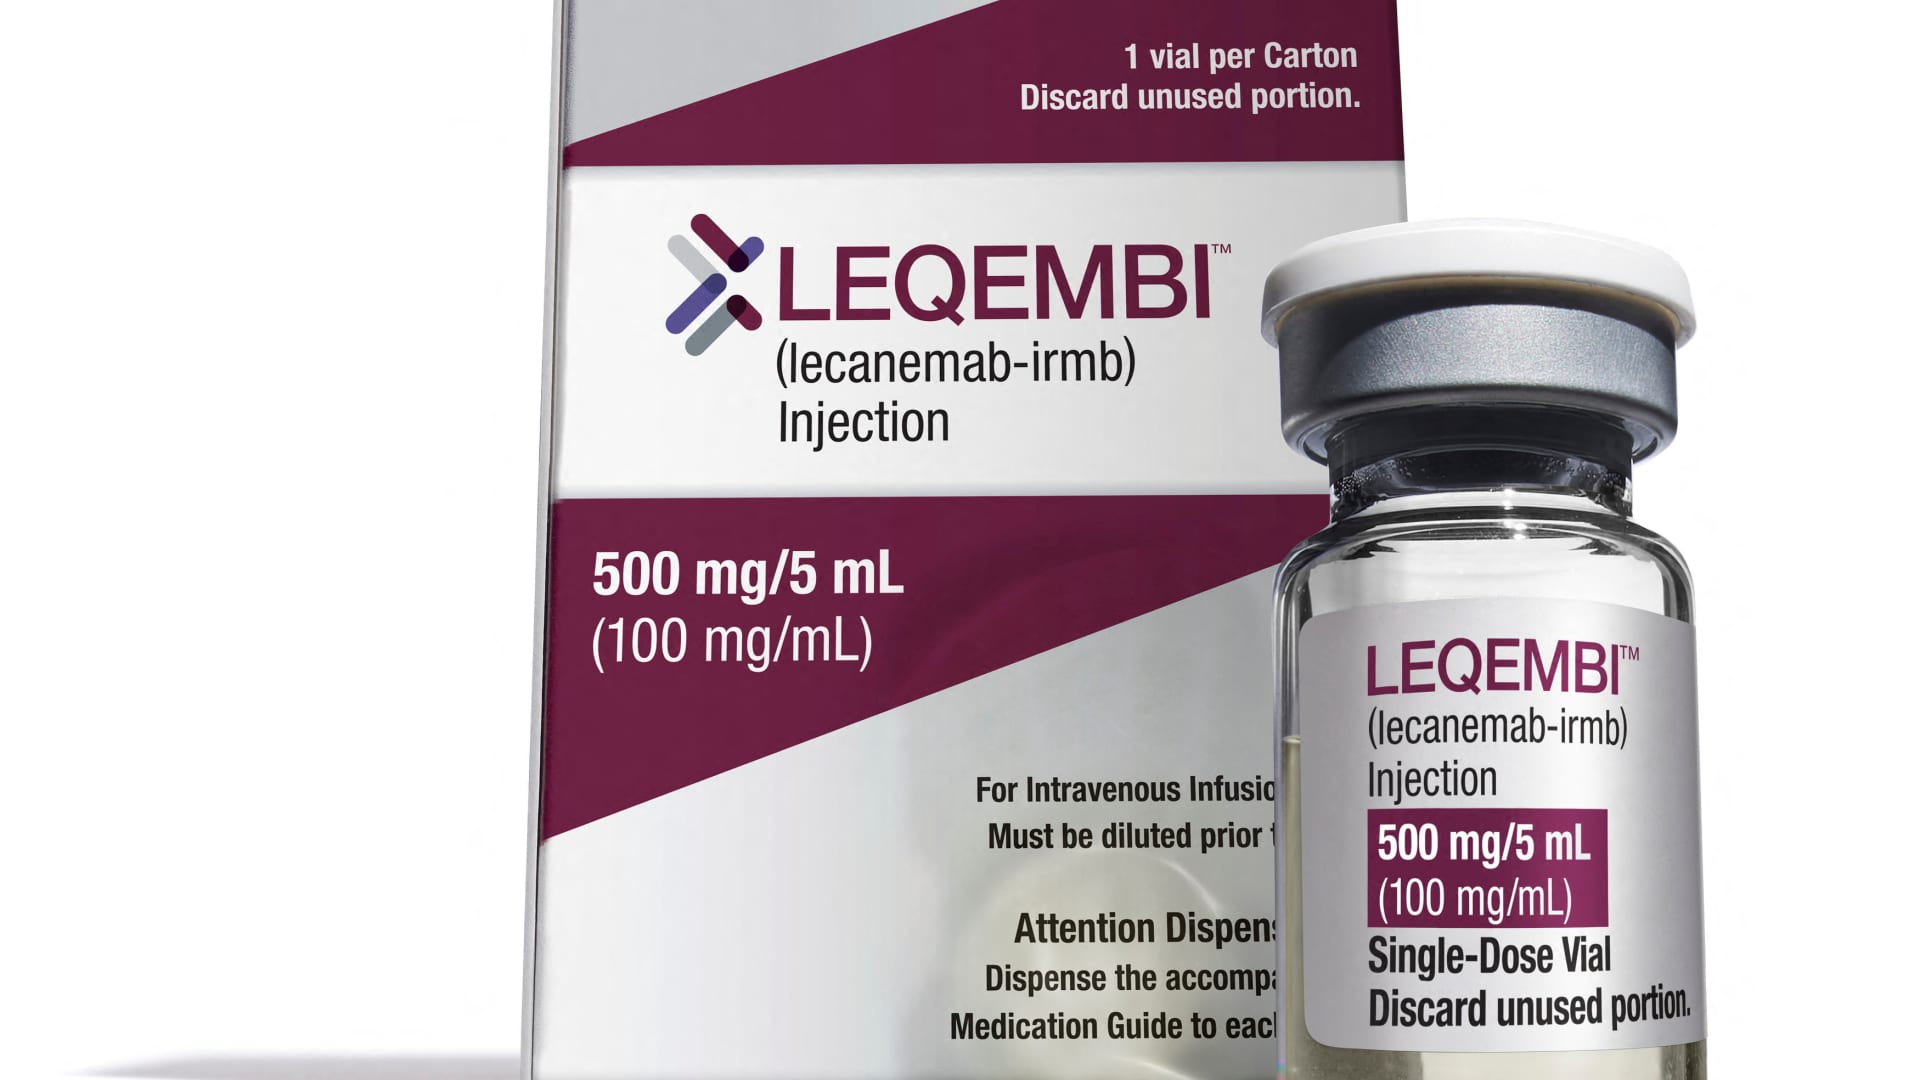 More convenient form of breakthrough Alzheimer’s drug Leqembi shows promising results in study